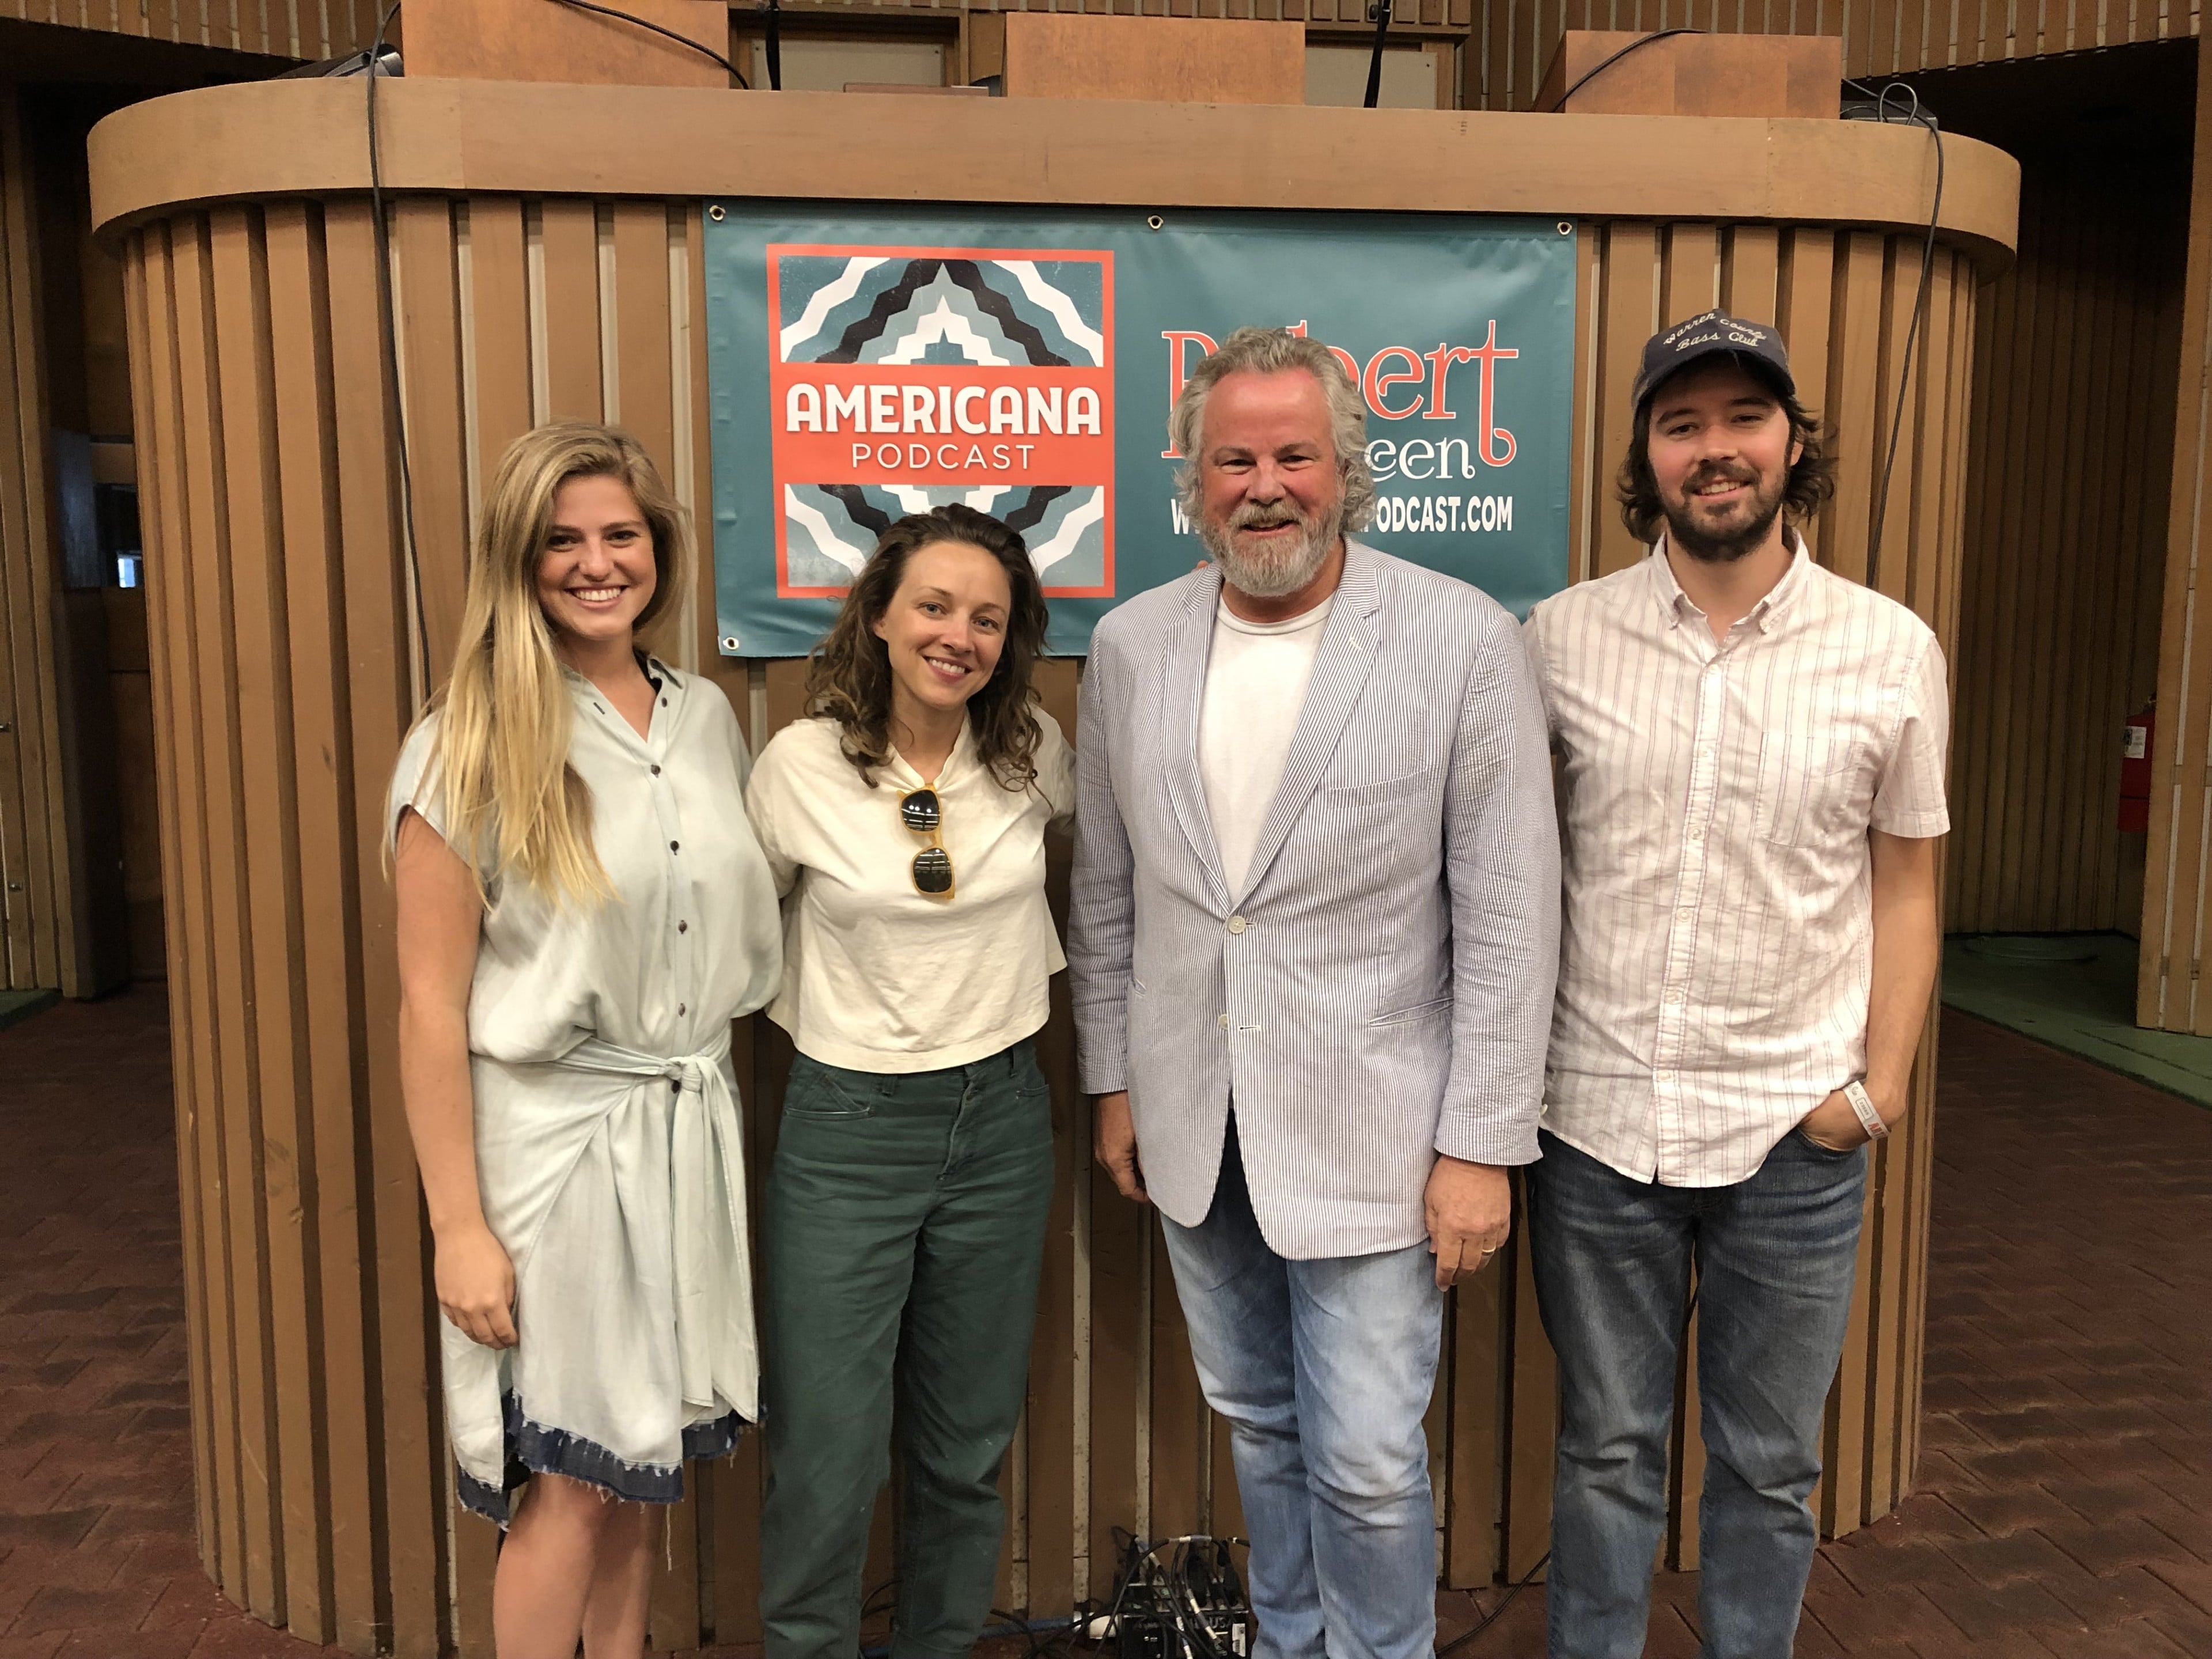 Robert Earl Keen Releases Interview with Mandolin Orange on Americana Podcast